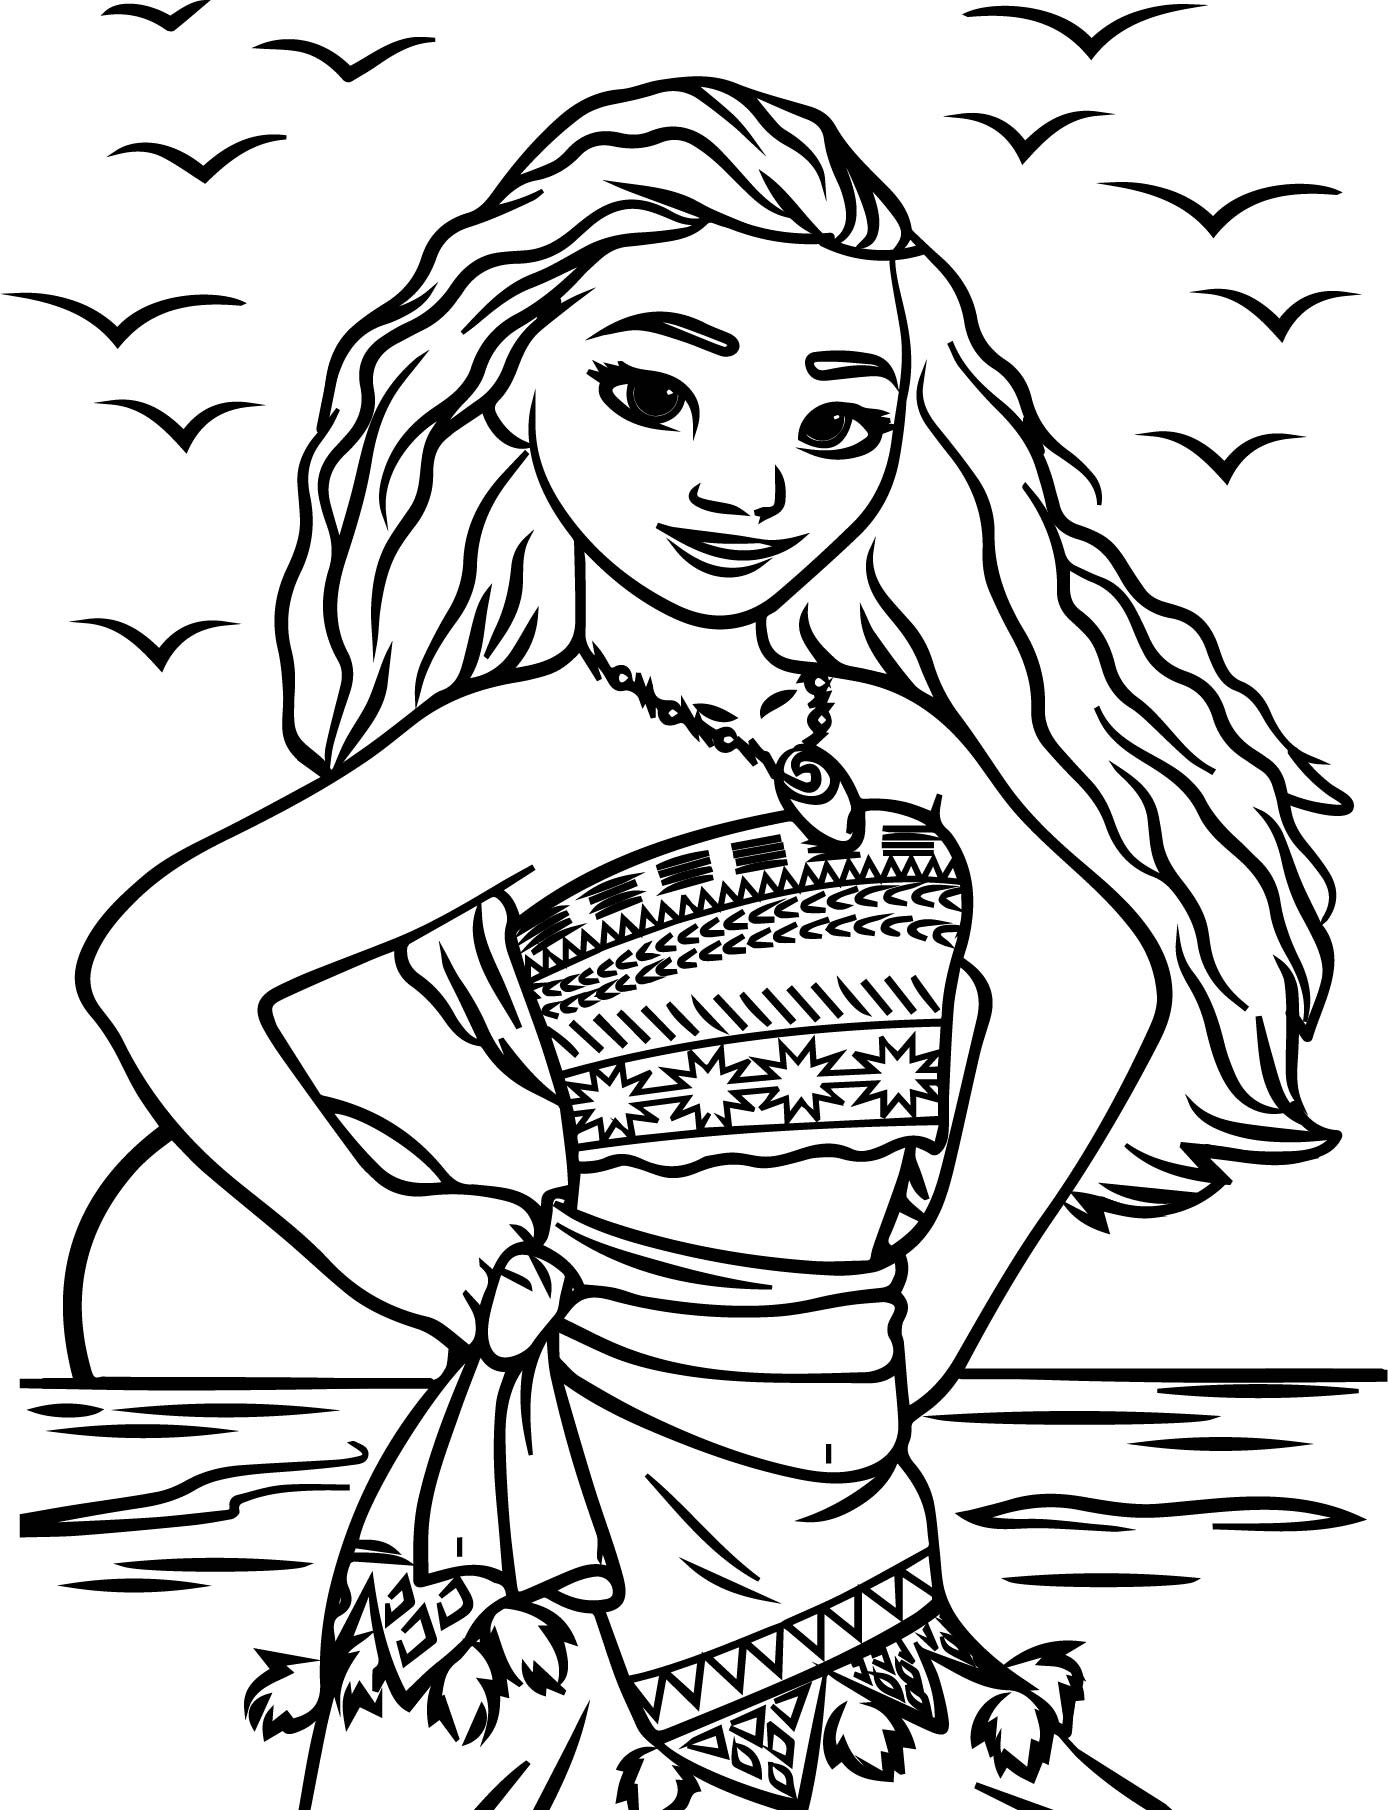 Moana Coloring Pages For Kids
 Disney Moana Coloring Page